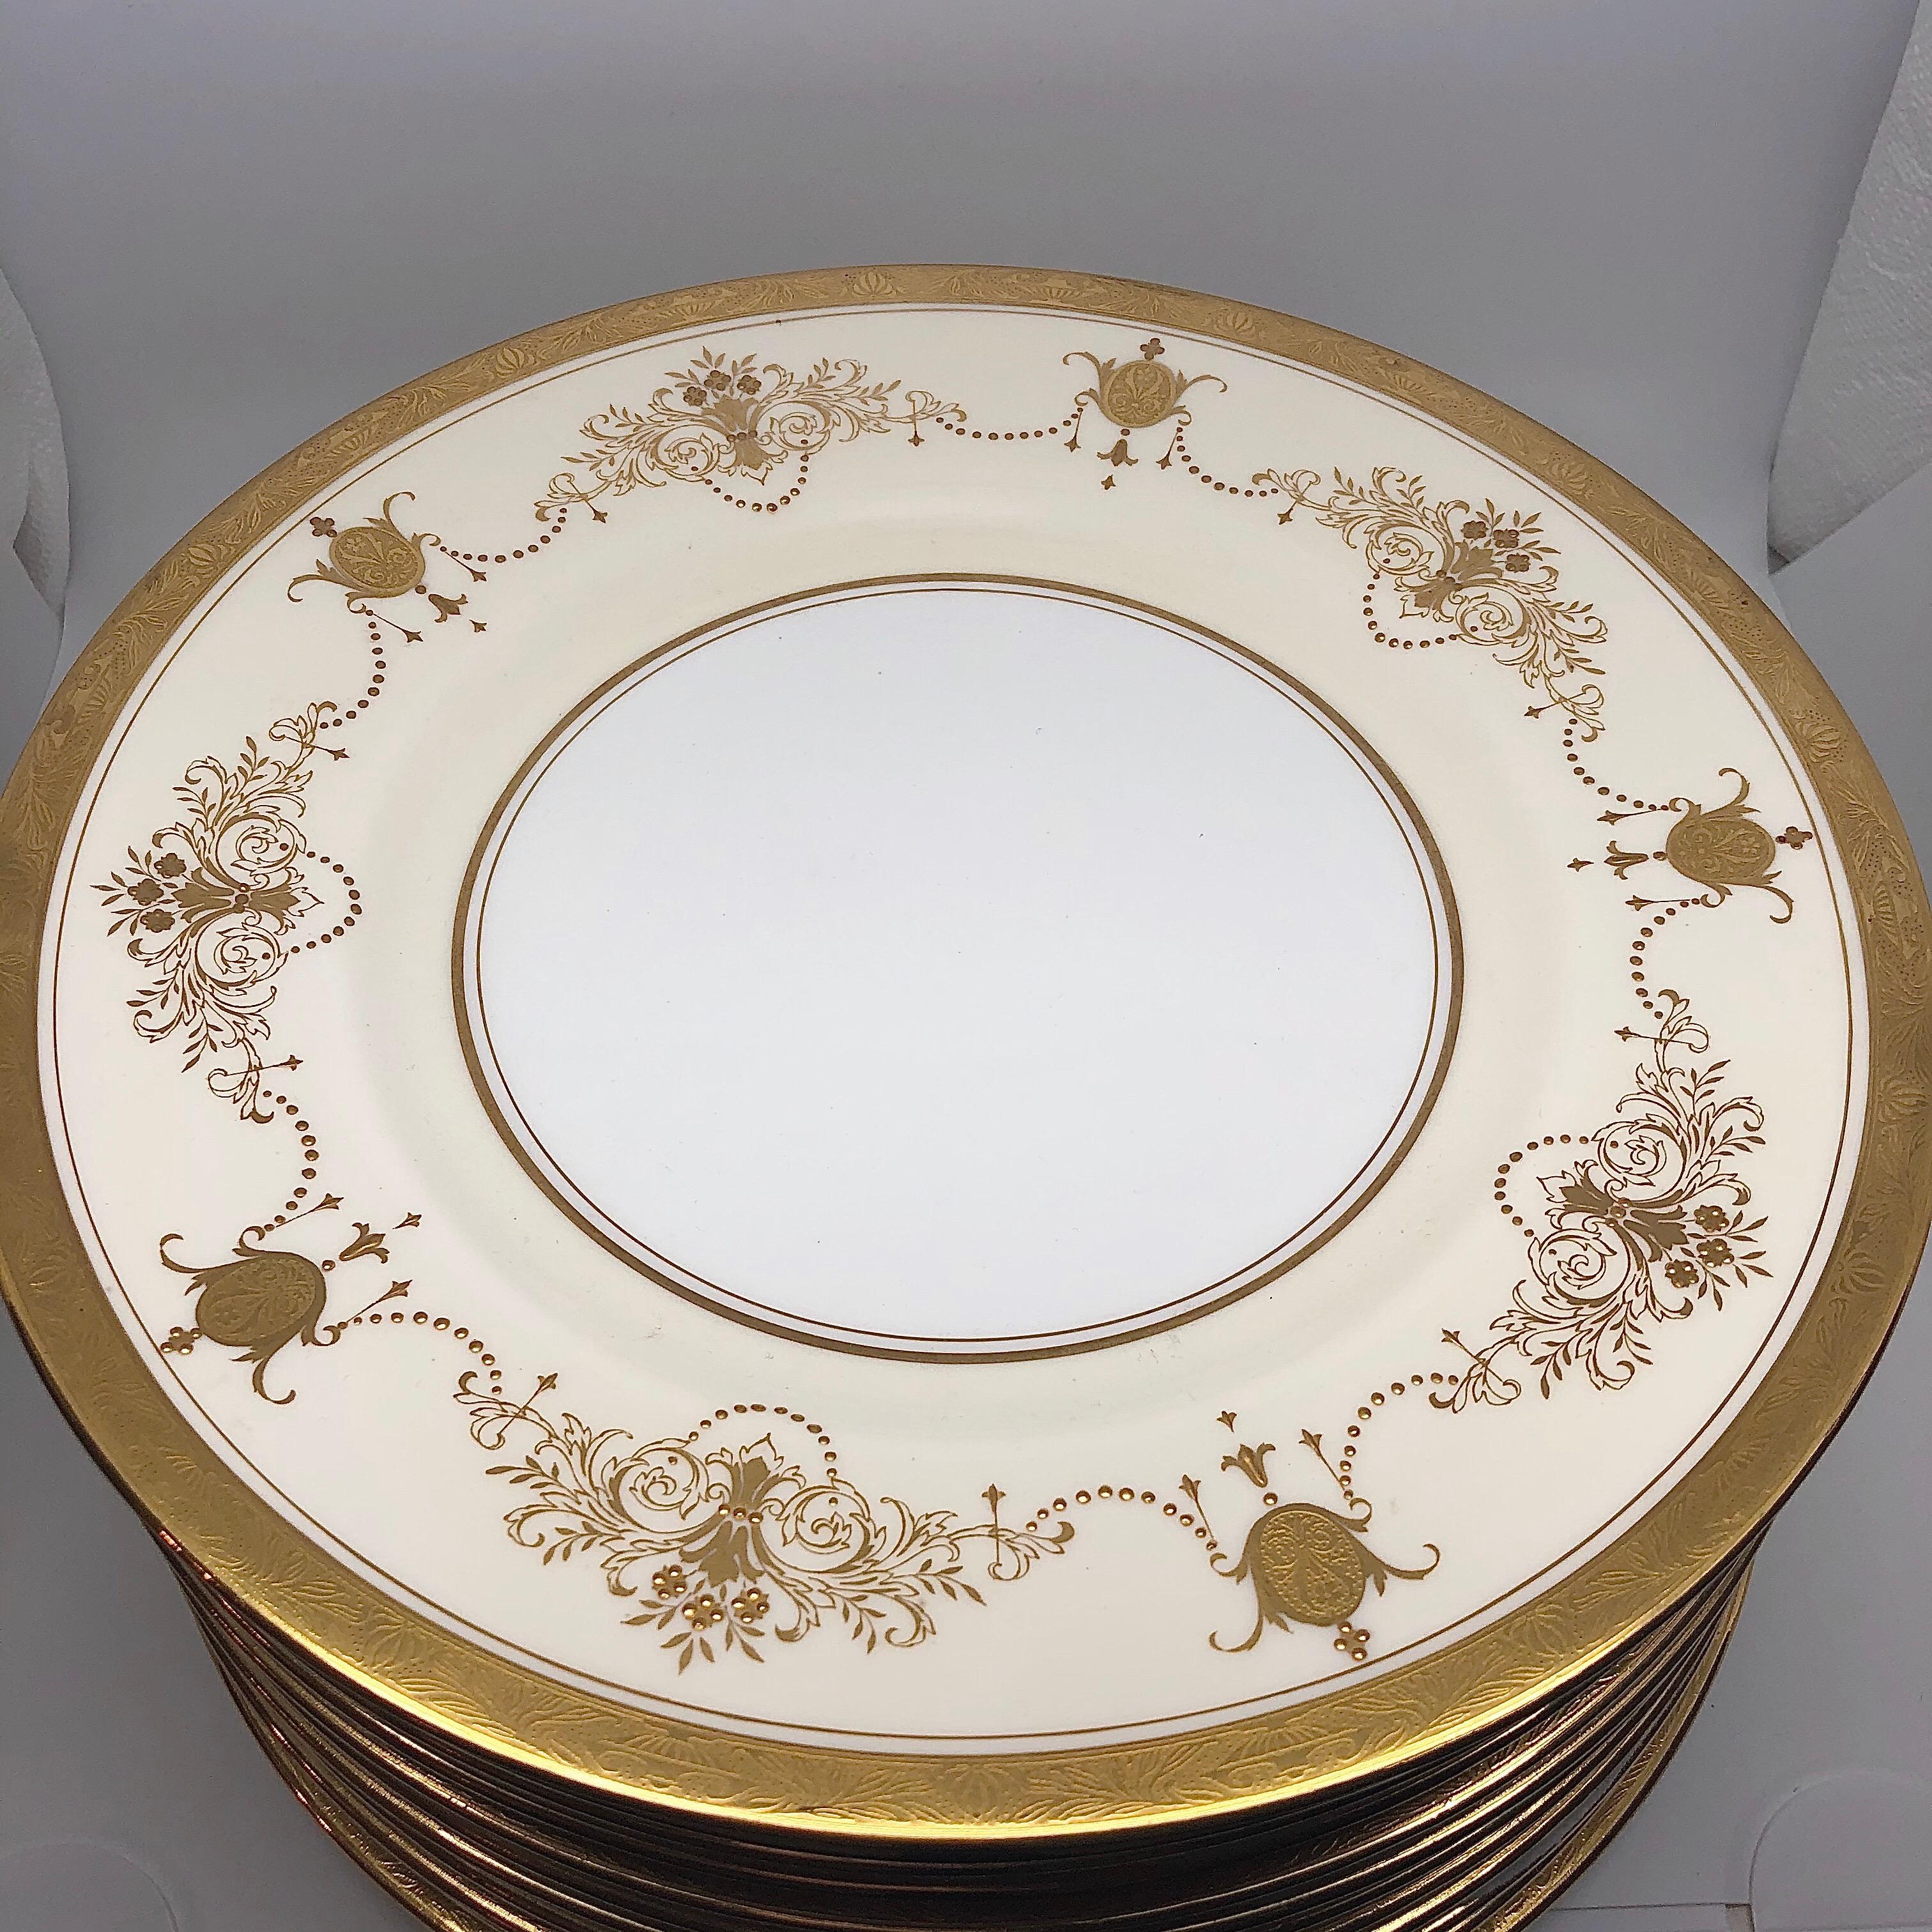 This is a fabulous set of 12 Minton Dinner plates decorated with gilt vases of flowers and ribbons of raised gold jeweling. Minton made them for Davis Collamore in New York in 1911-1920. Davis Collamore was a rival of Tiffany at this time, and sold